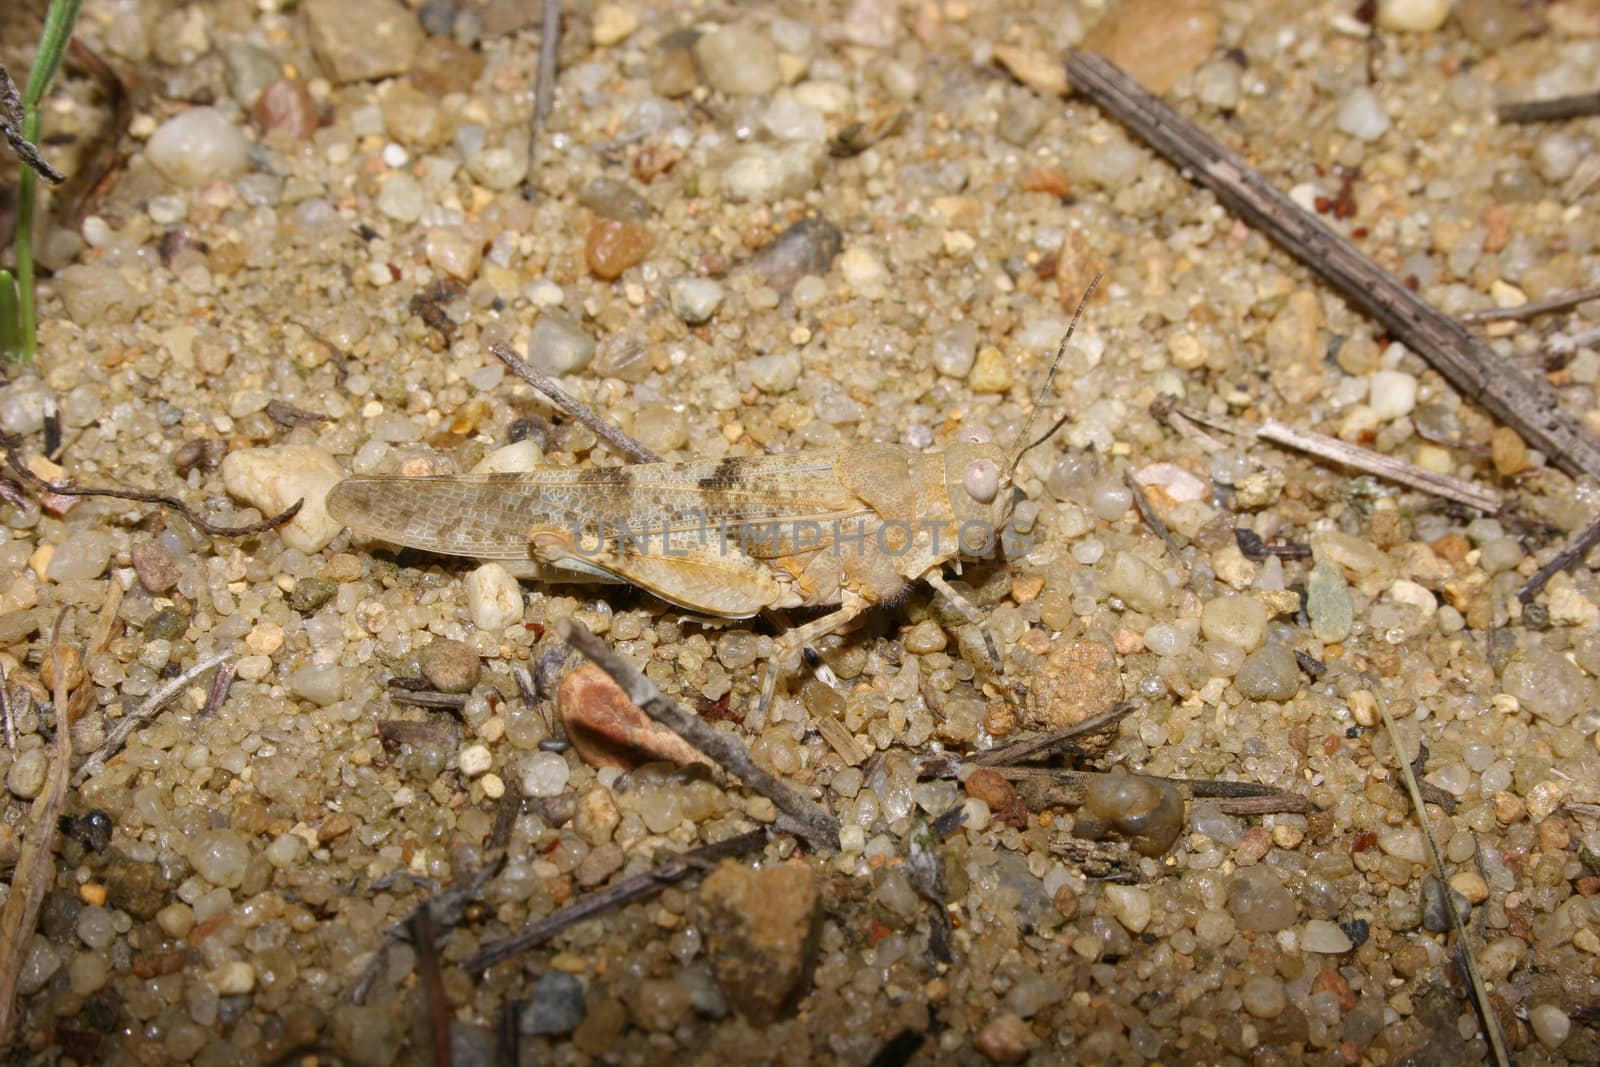 Male of a Red Sand Grasshopper (Sphingonotus caerulans)